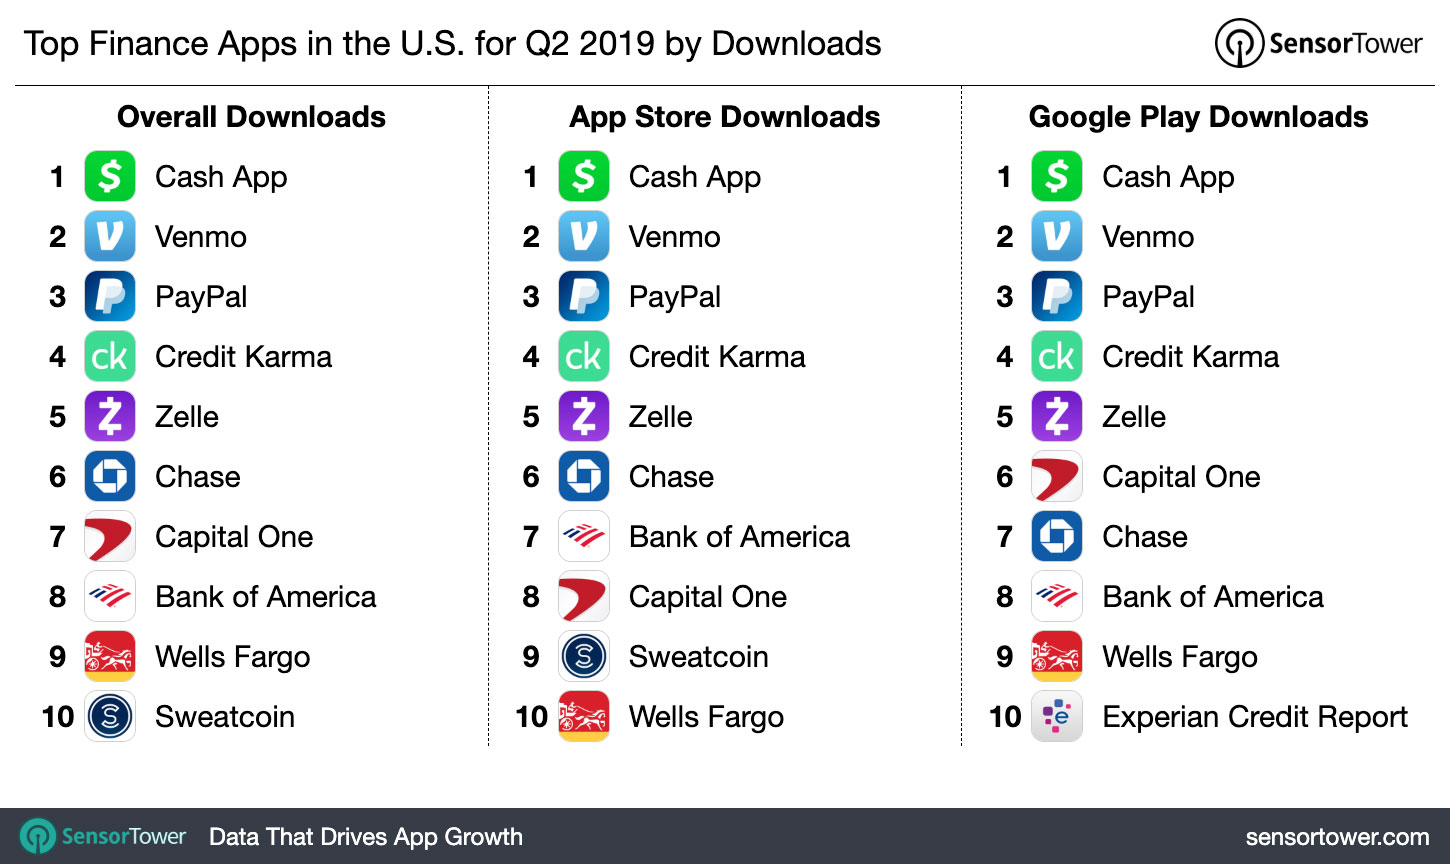 Top Finance Apps in the U.S. for Q2 2019 by Downloads